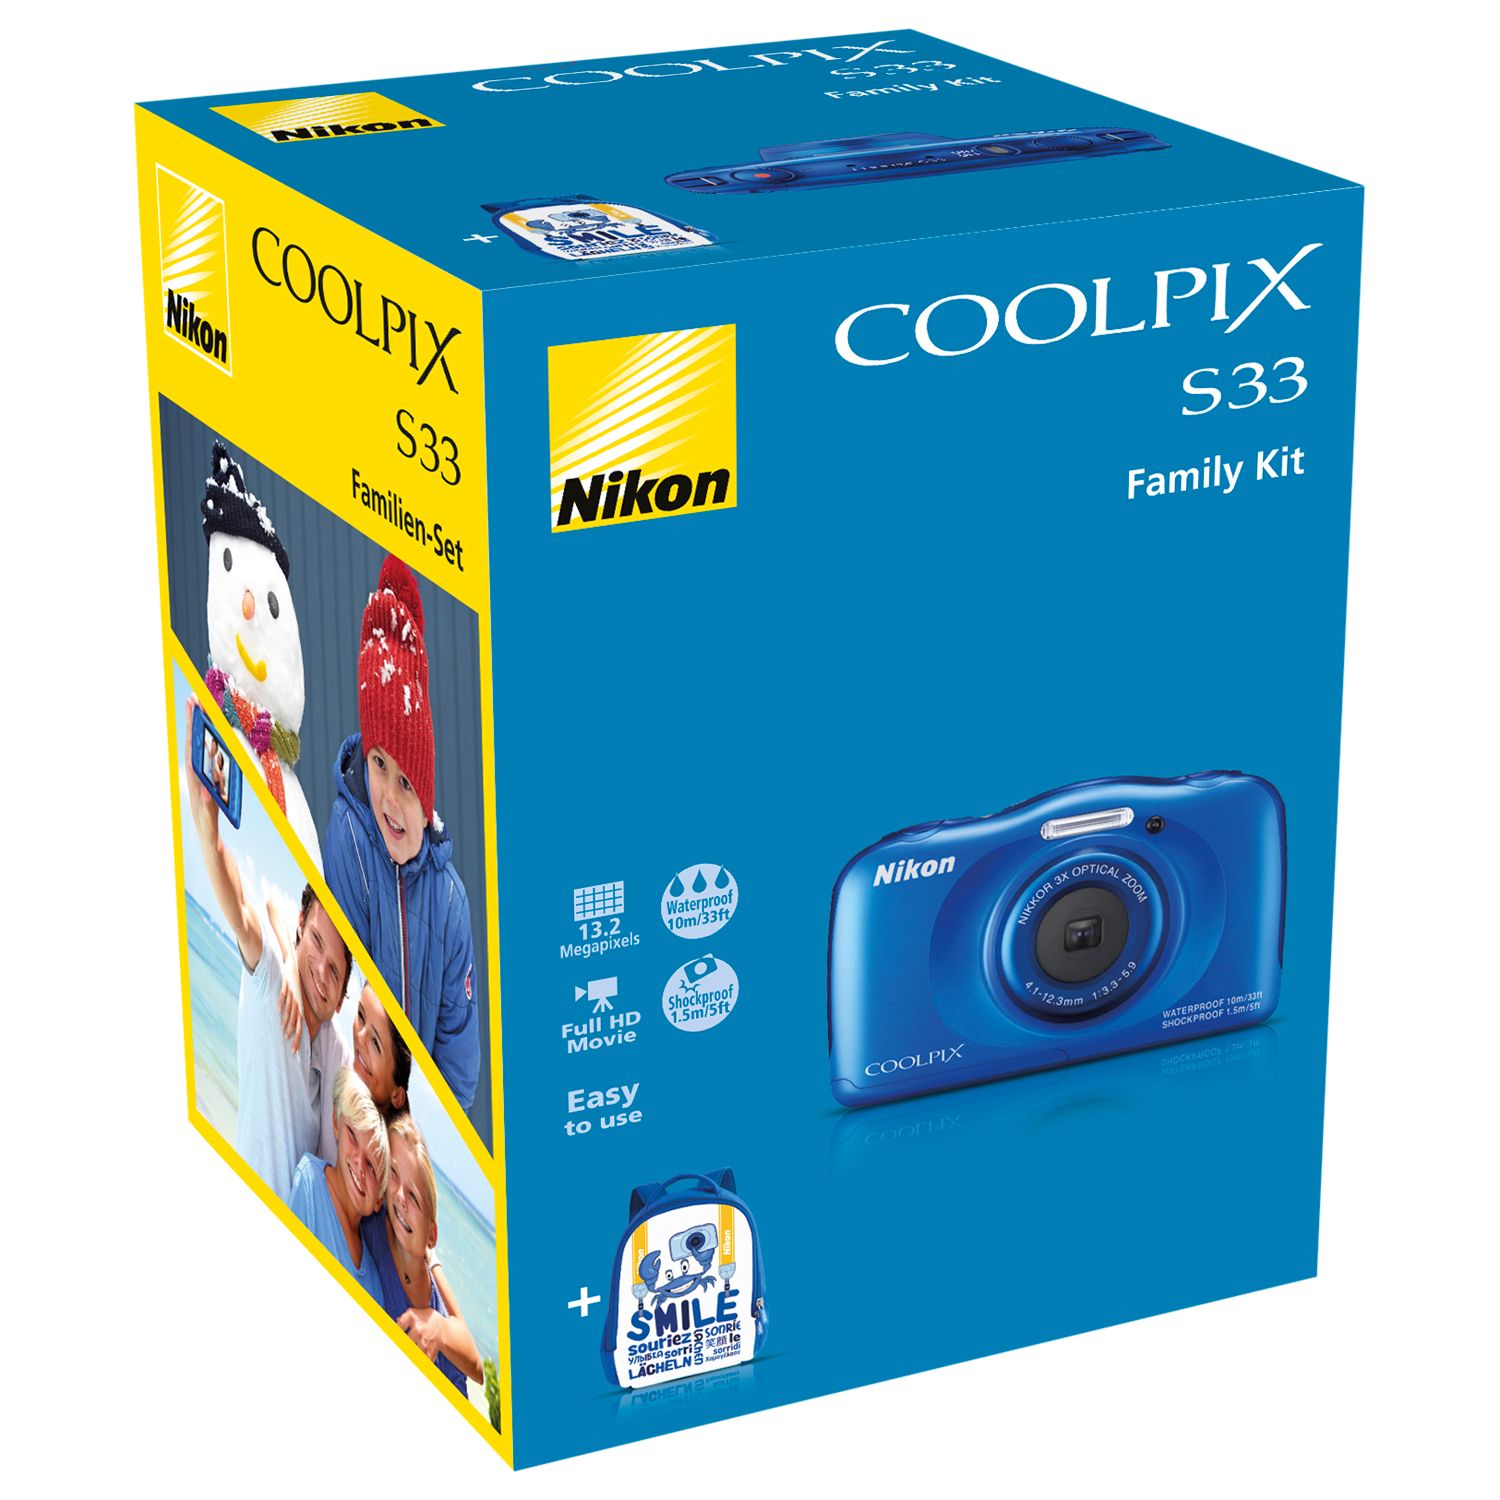 Nikon COOLPIX S33 Waterproof Compact Digital Camera, HD 1080p, 13.2MP, 3x Optical Zoom, 2.7" LCD Screen with Backpack